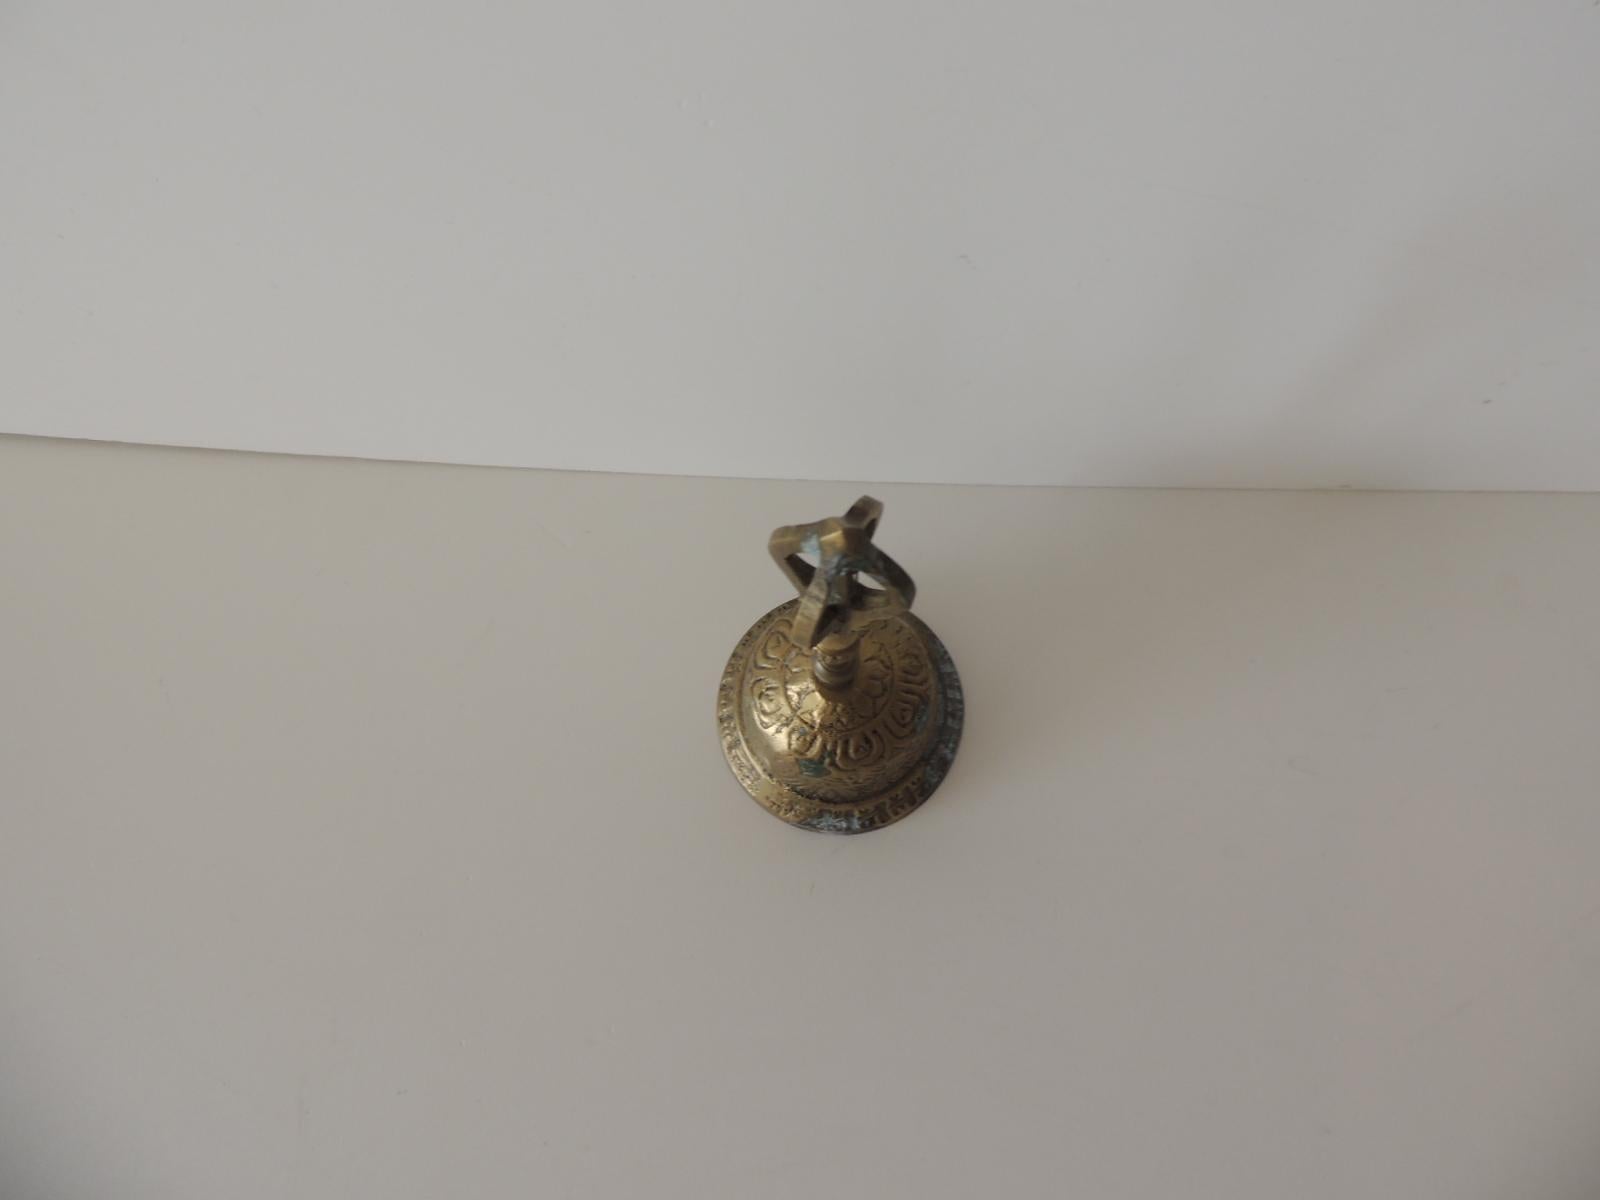 Vintage edged brass petite table bell.
(So discoloration on brass from age.)